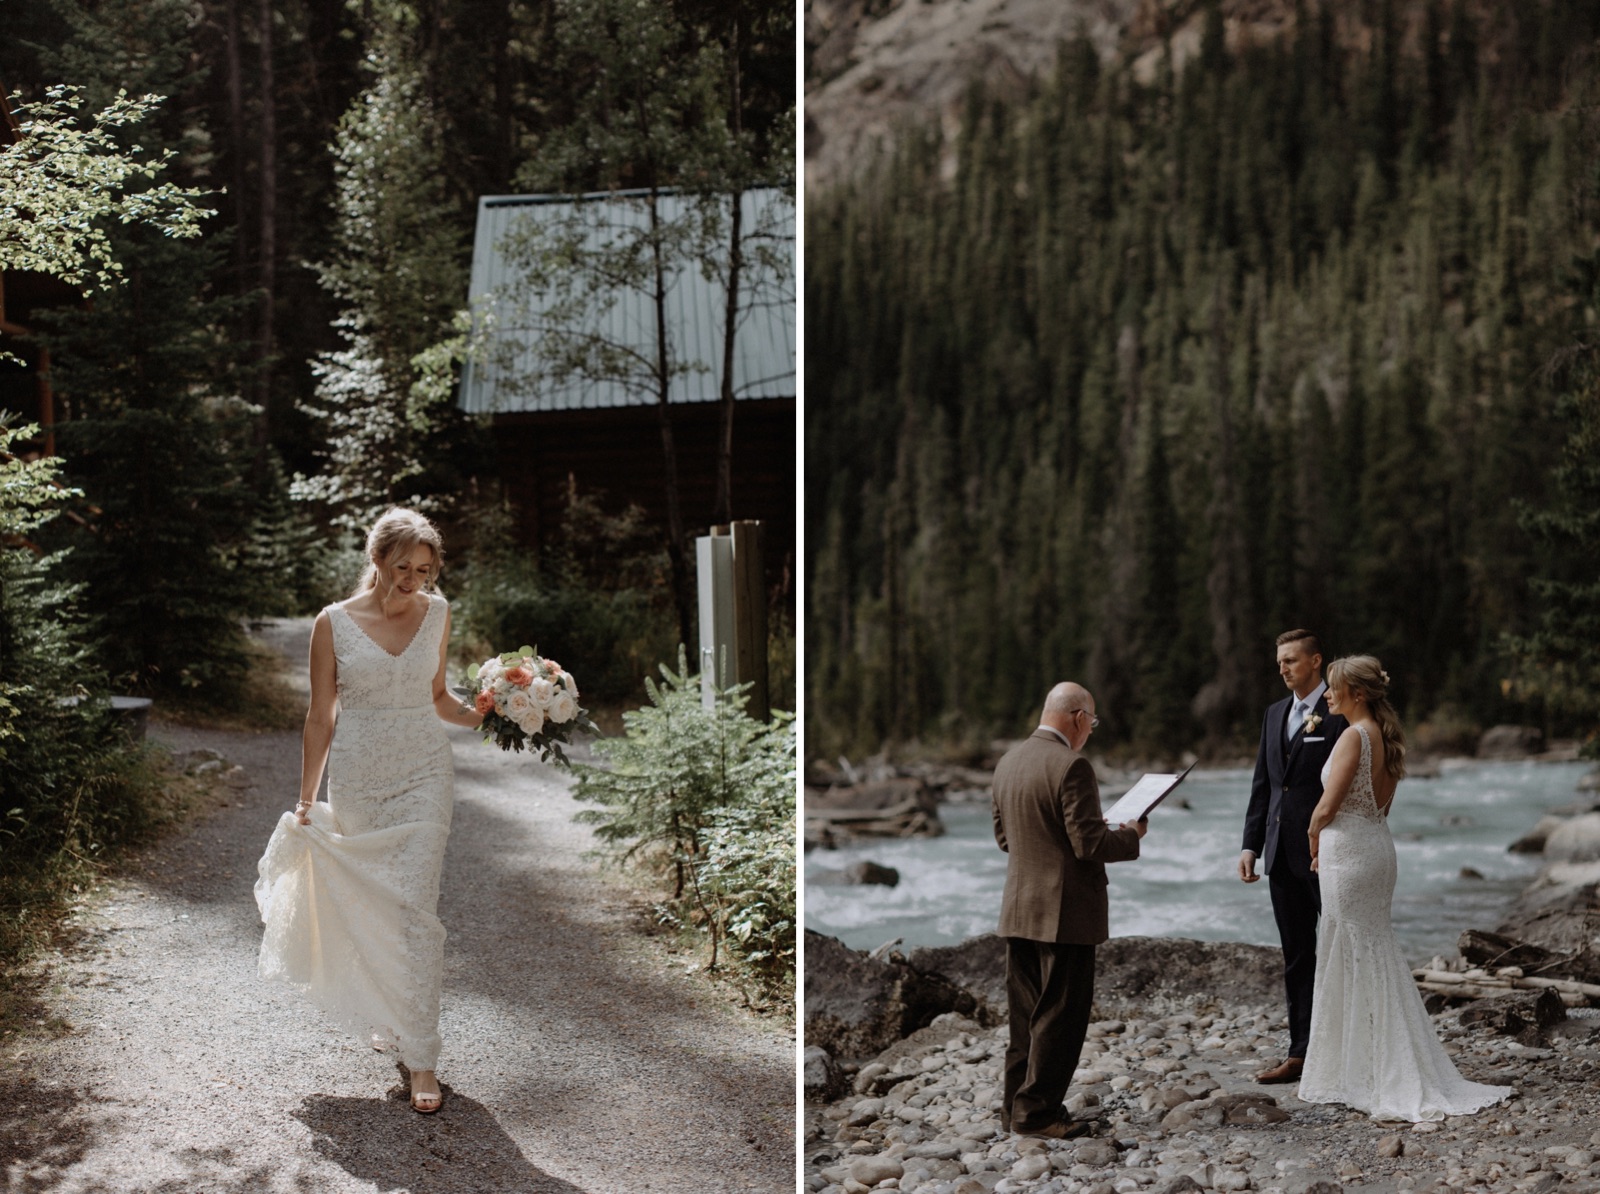 Secret ceremony location near Cathedral Mountain Lodge beside the Kicking Horse River